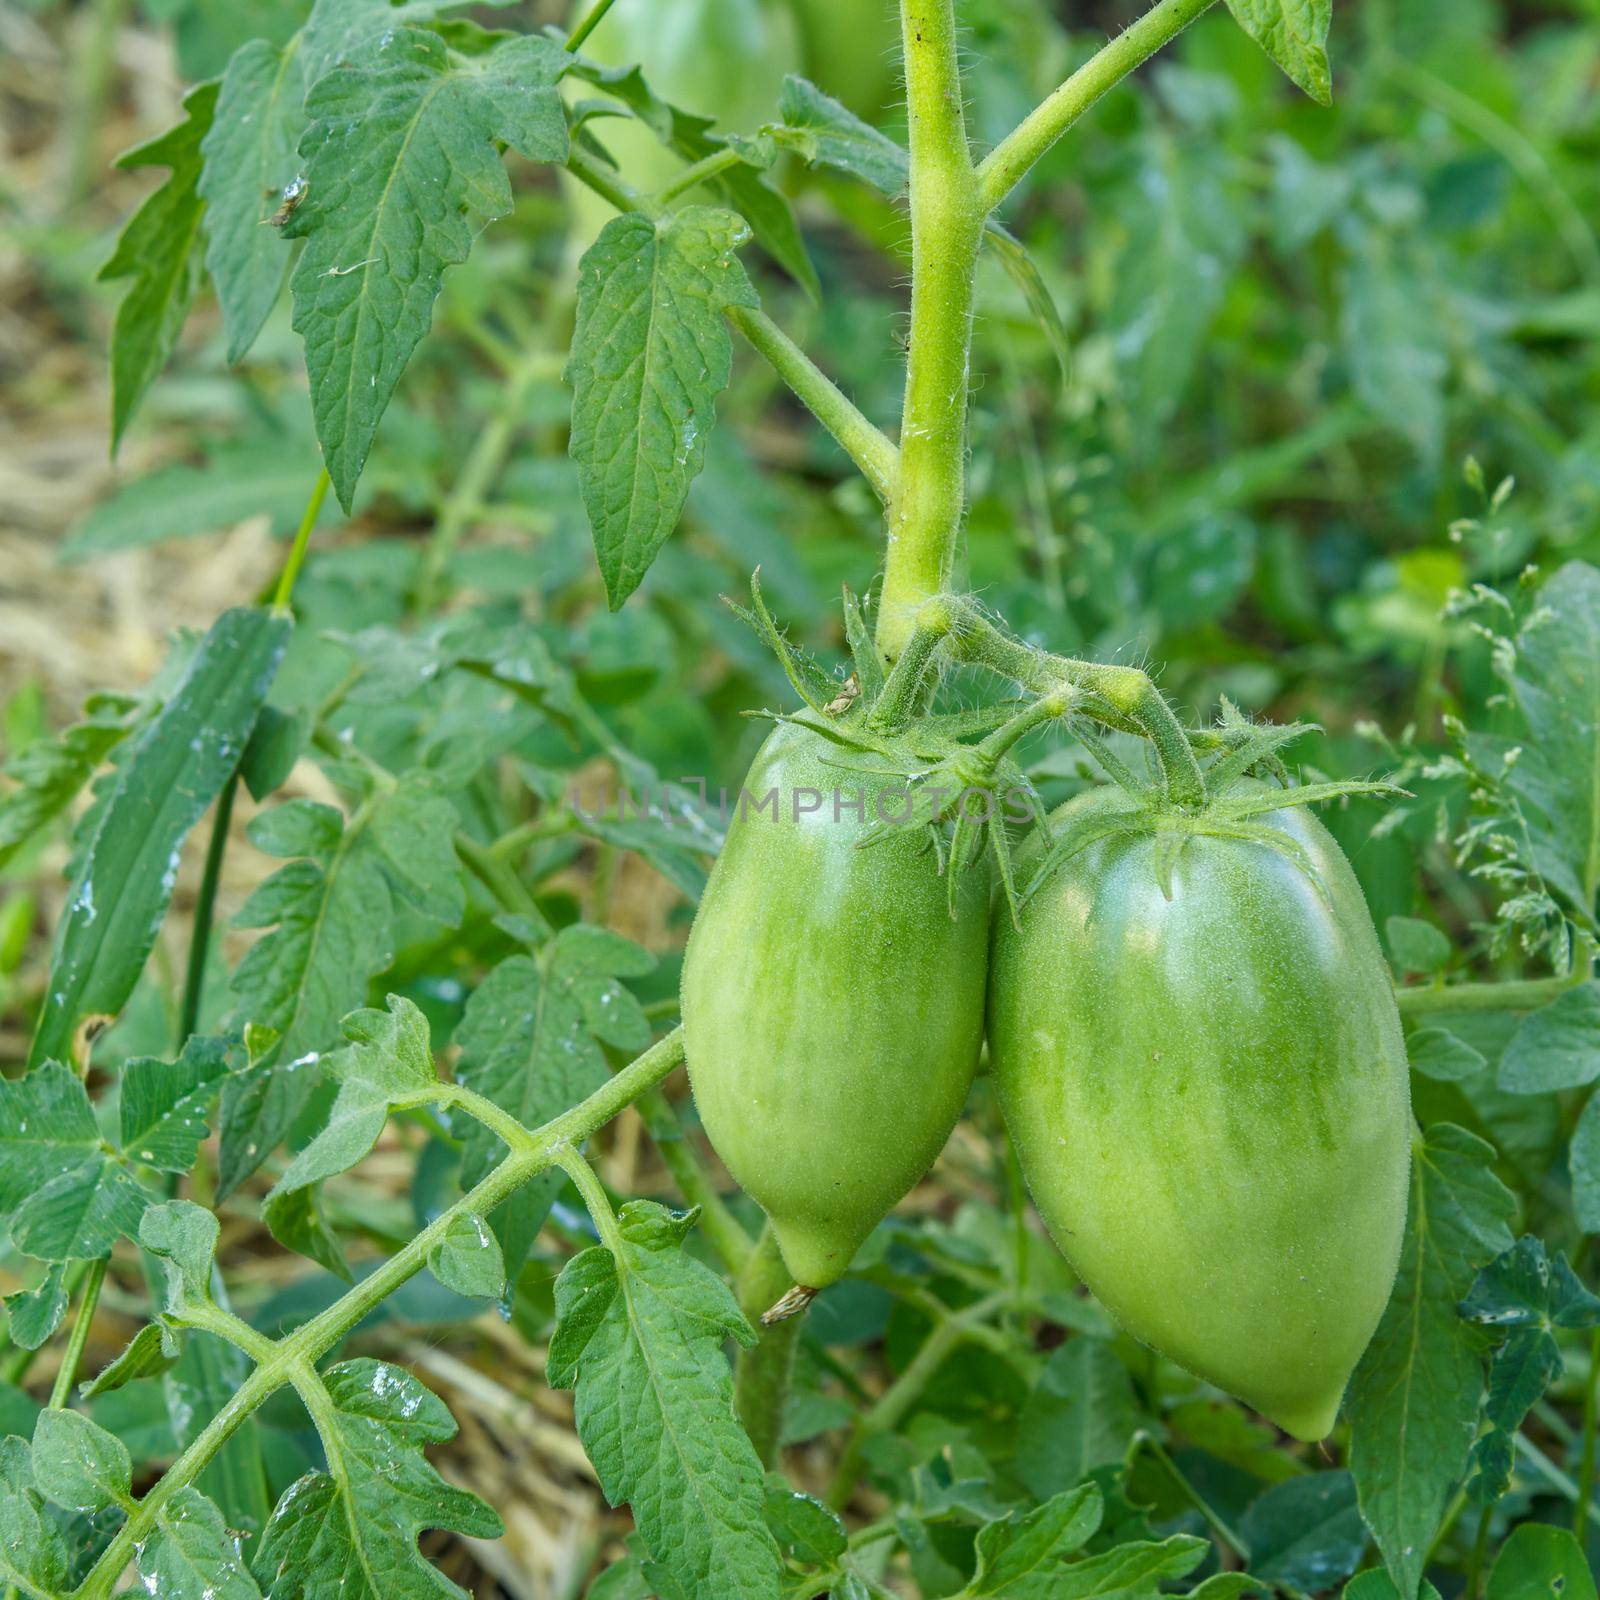 Unripe green tomatoes growing on a branch in the garden. Tomatoes in the garden bed with green fruits. Green tomatoes on a bush.